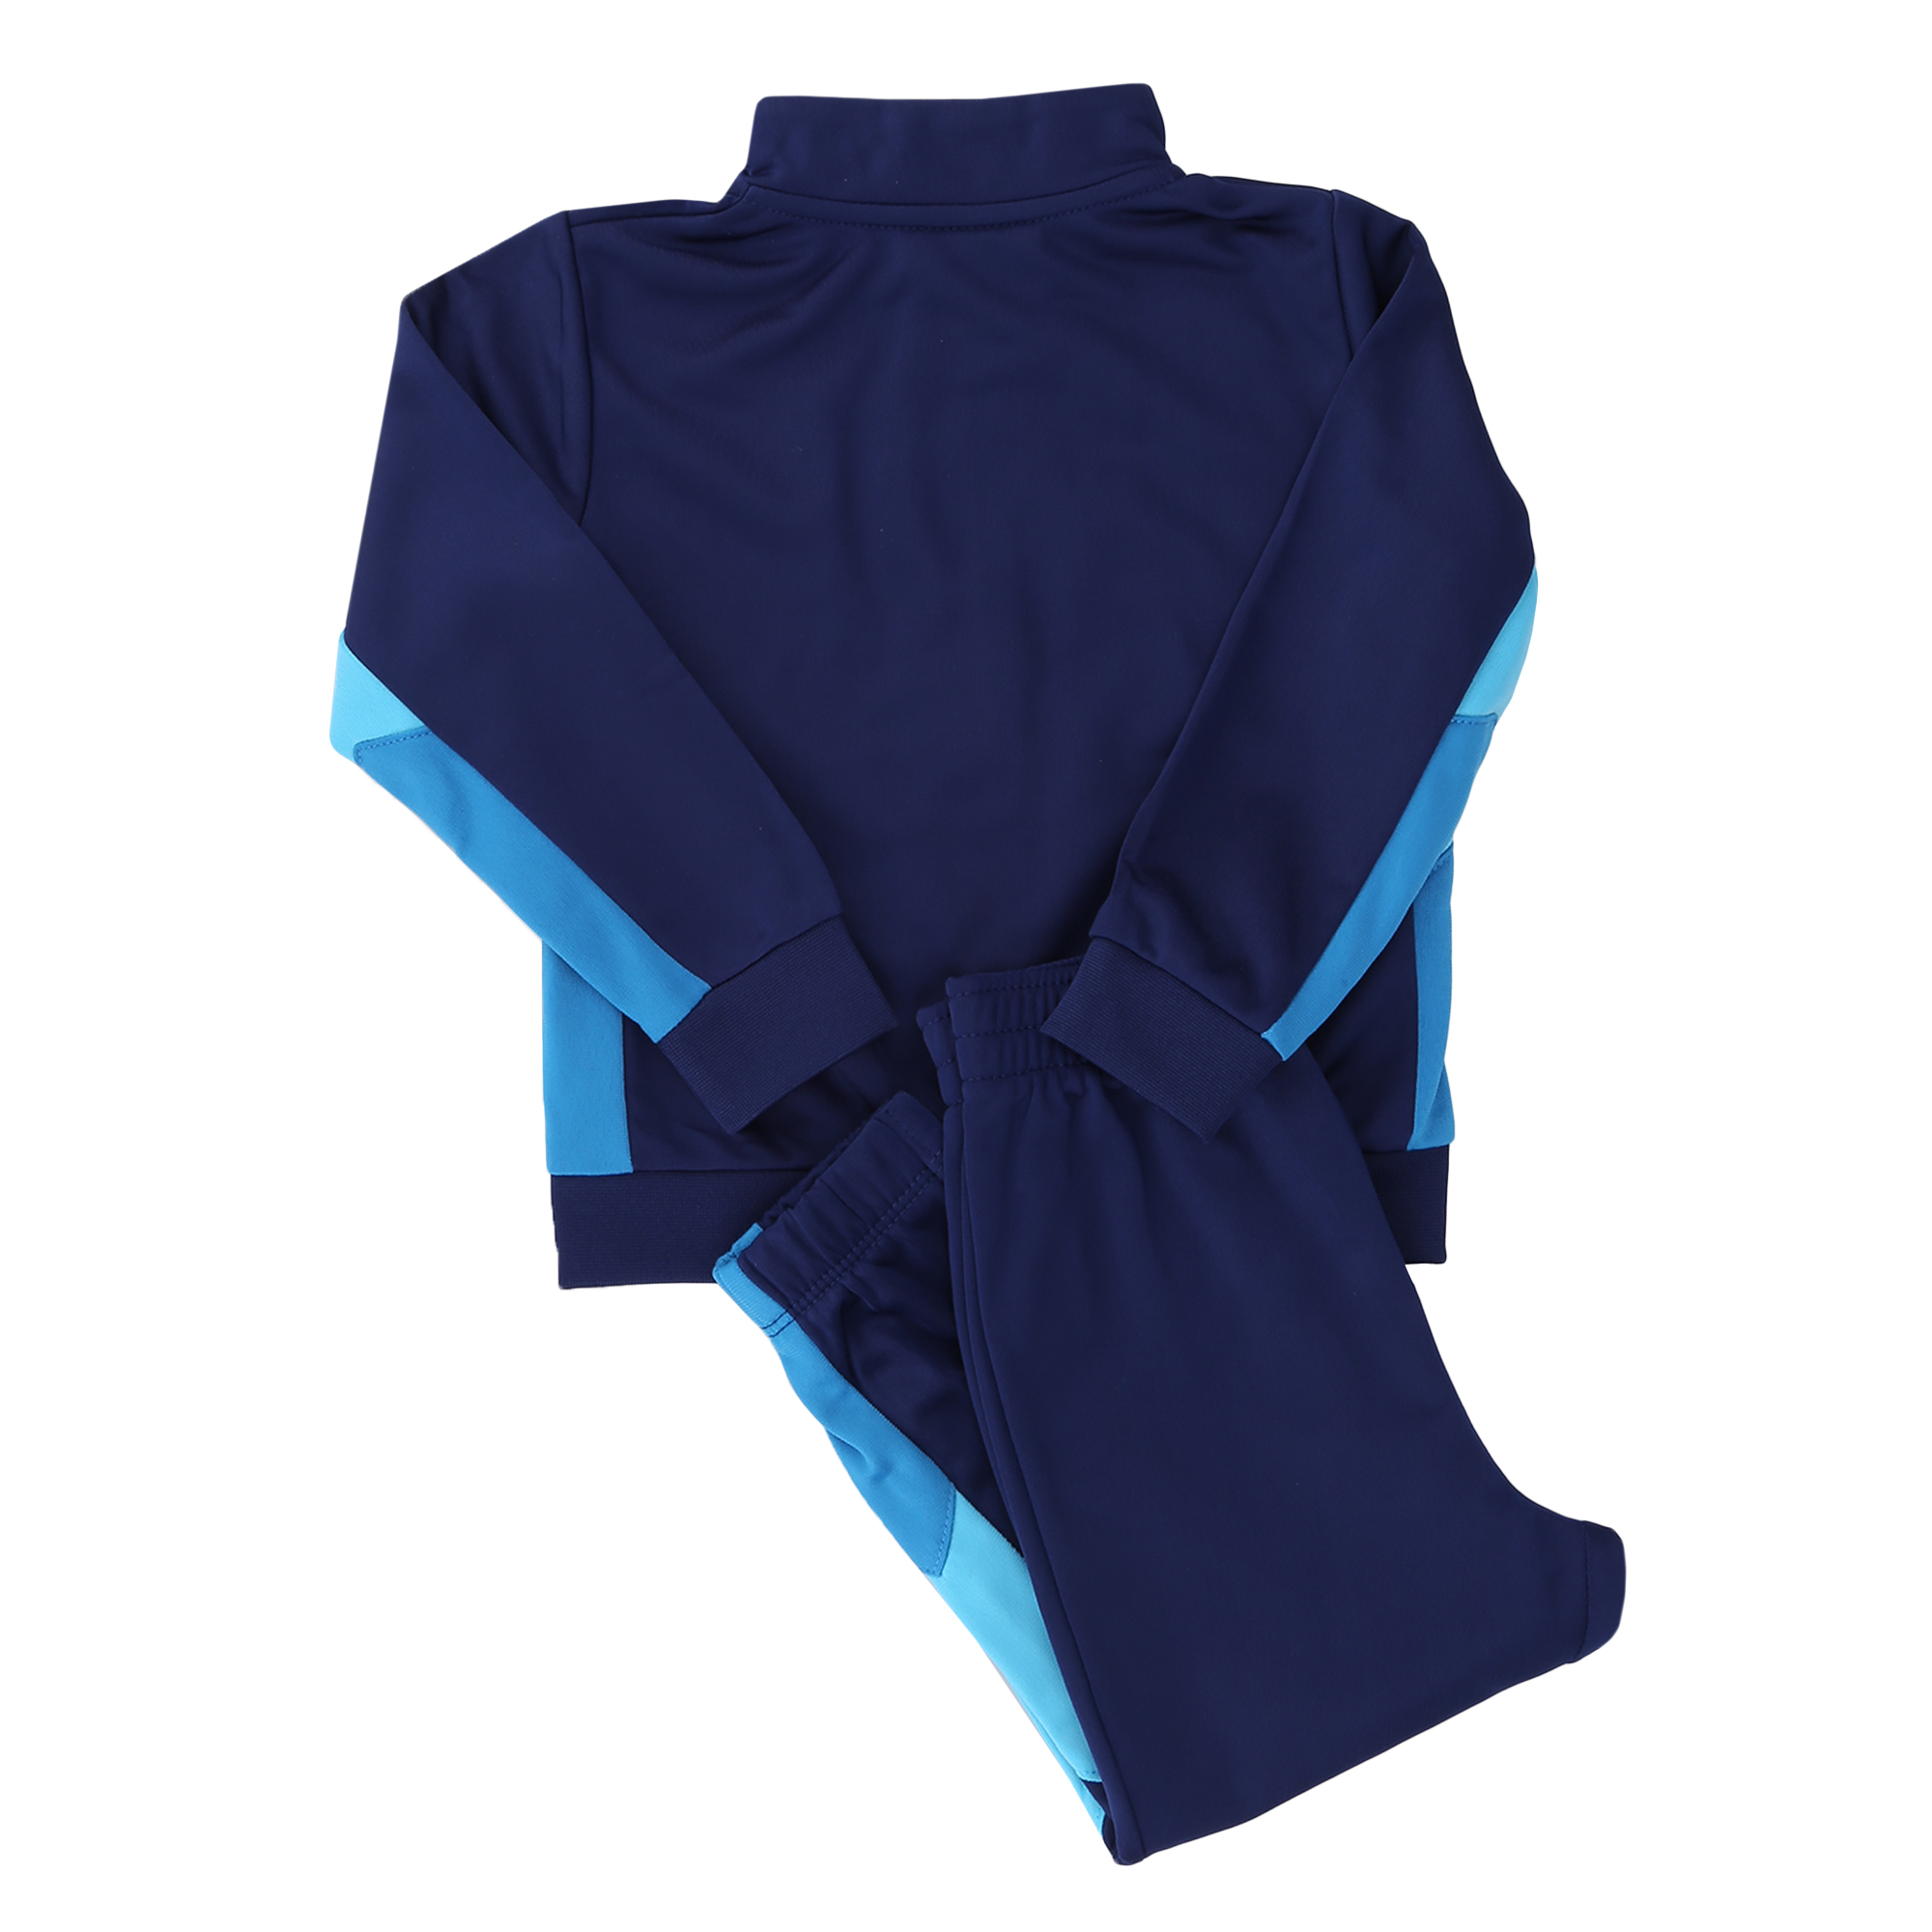 Conjunto Nike G4G Tricot Tracksuit,  image number null